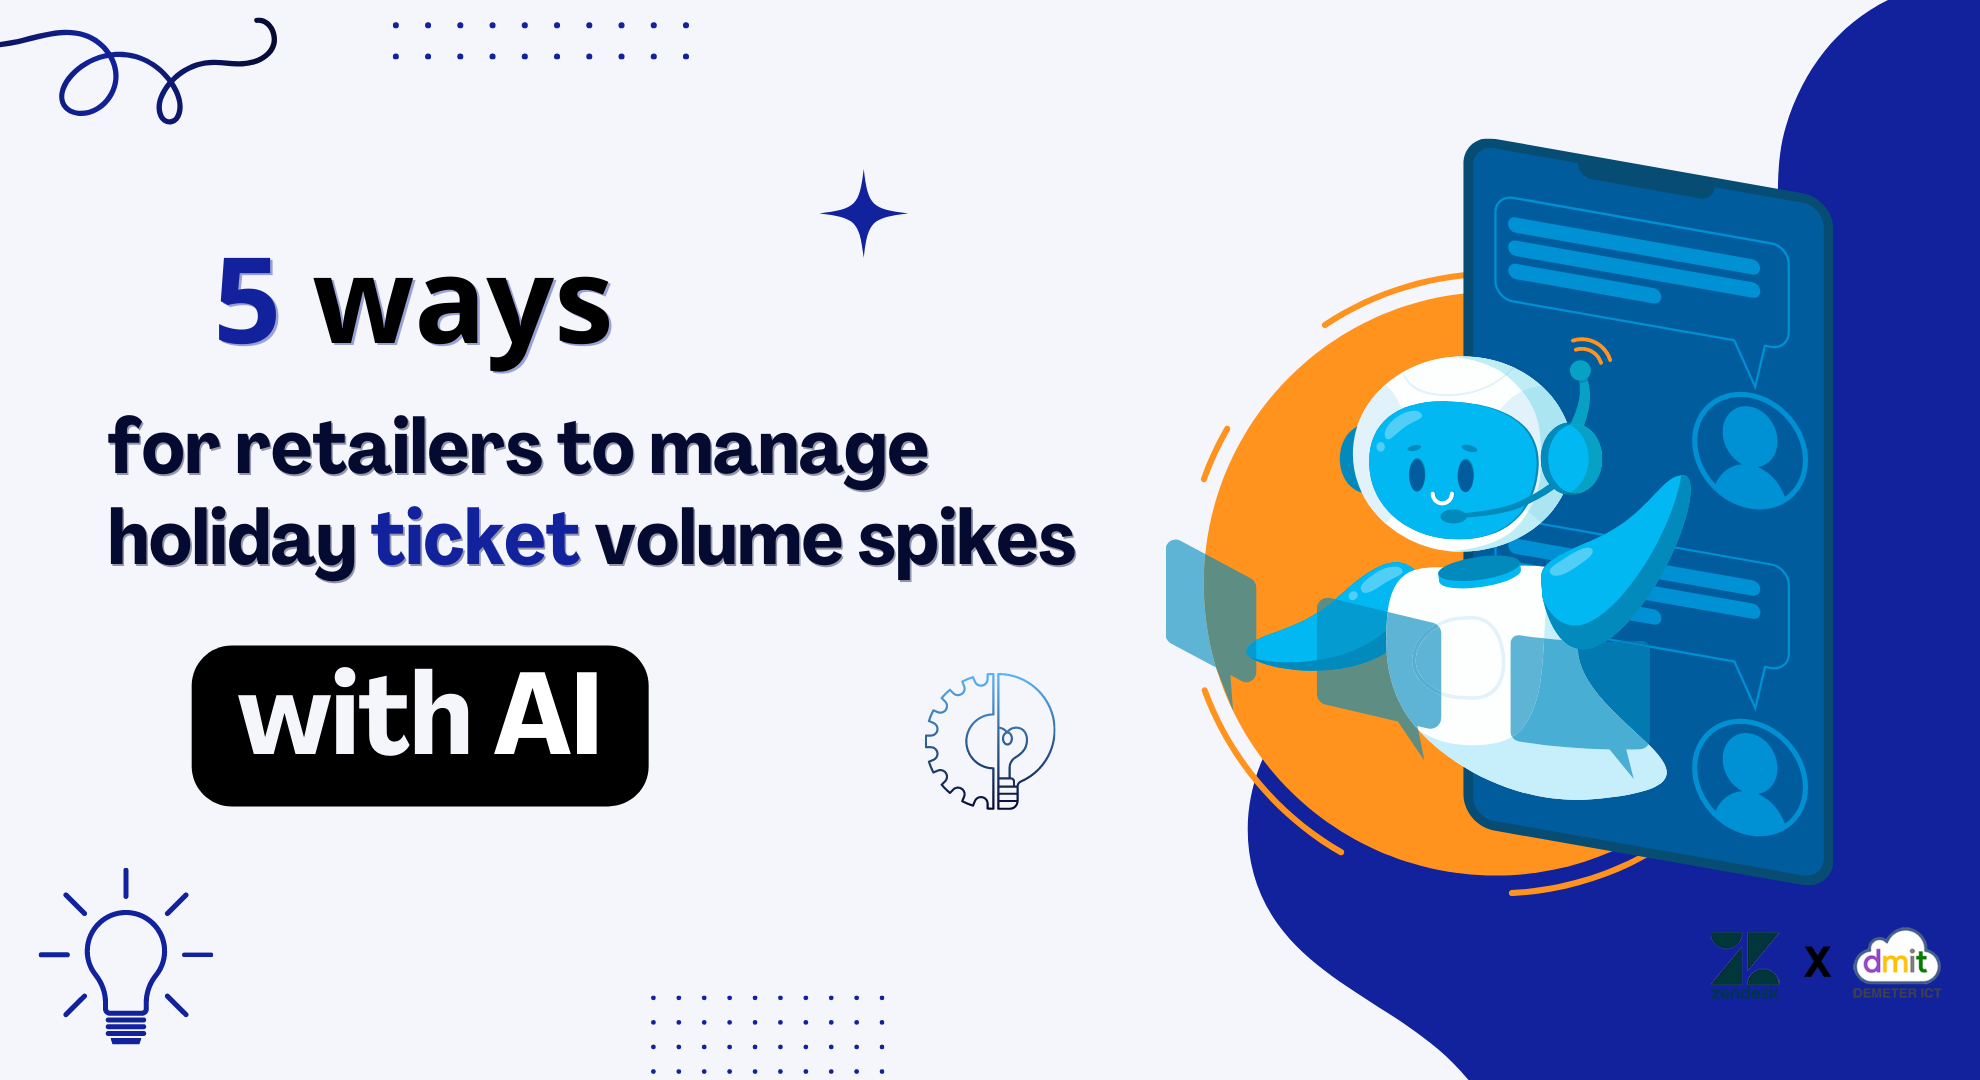 5 ways for retailers to manage holiday ticket volume spikes with AI